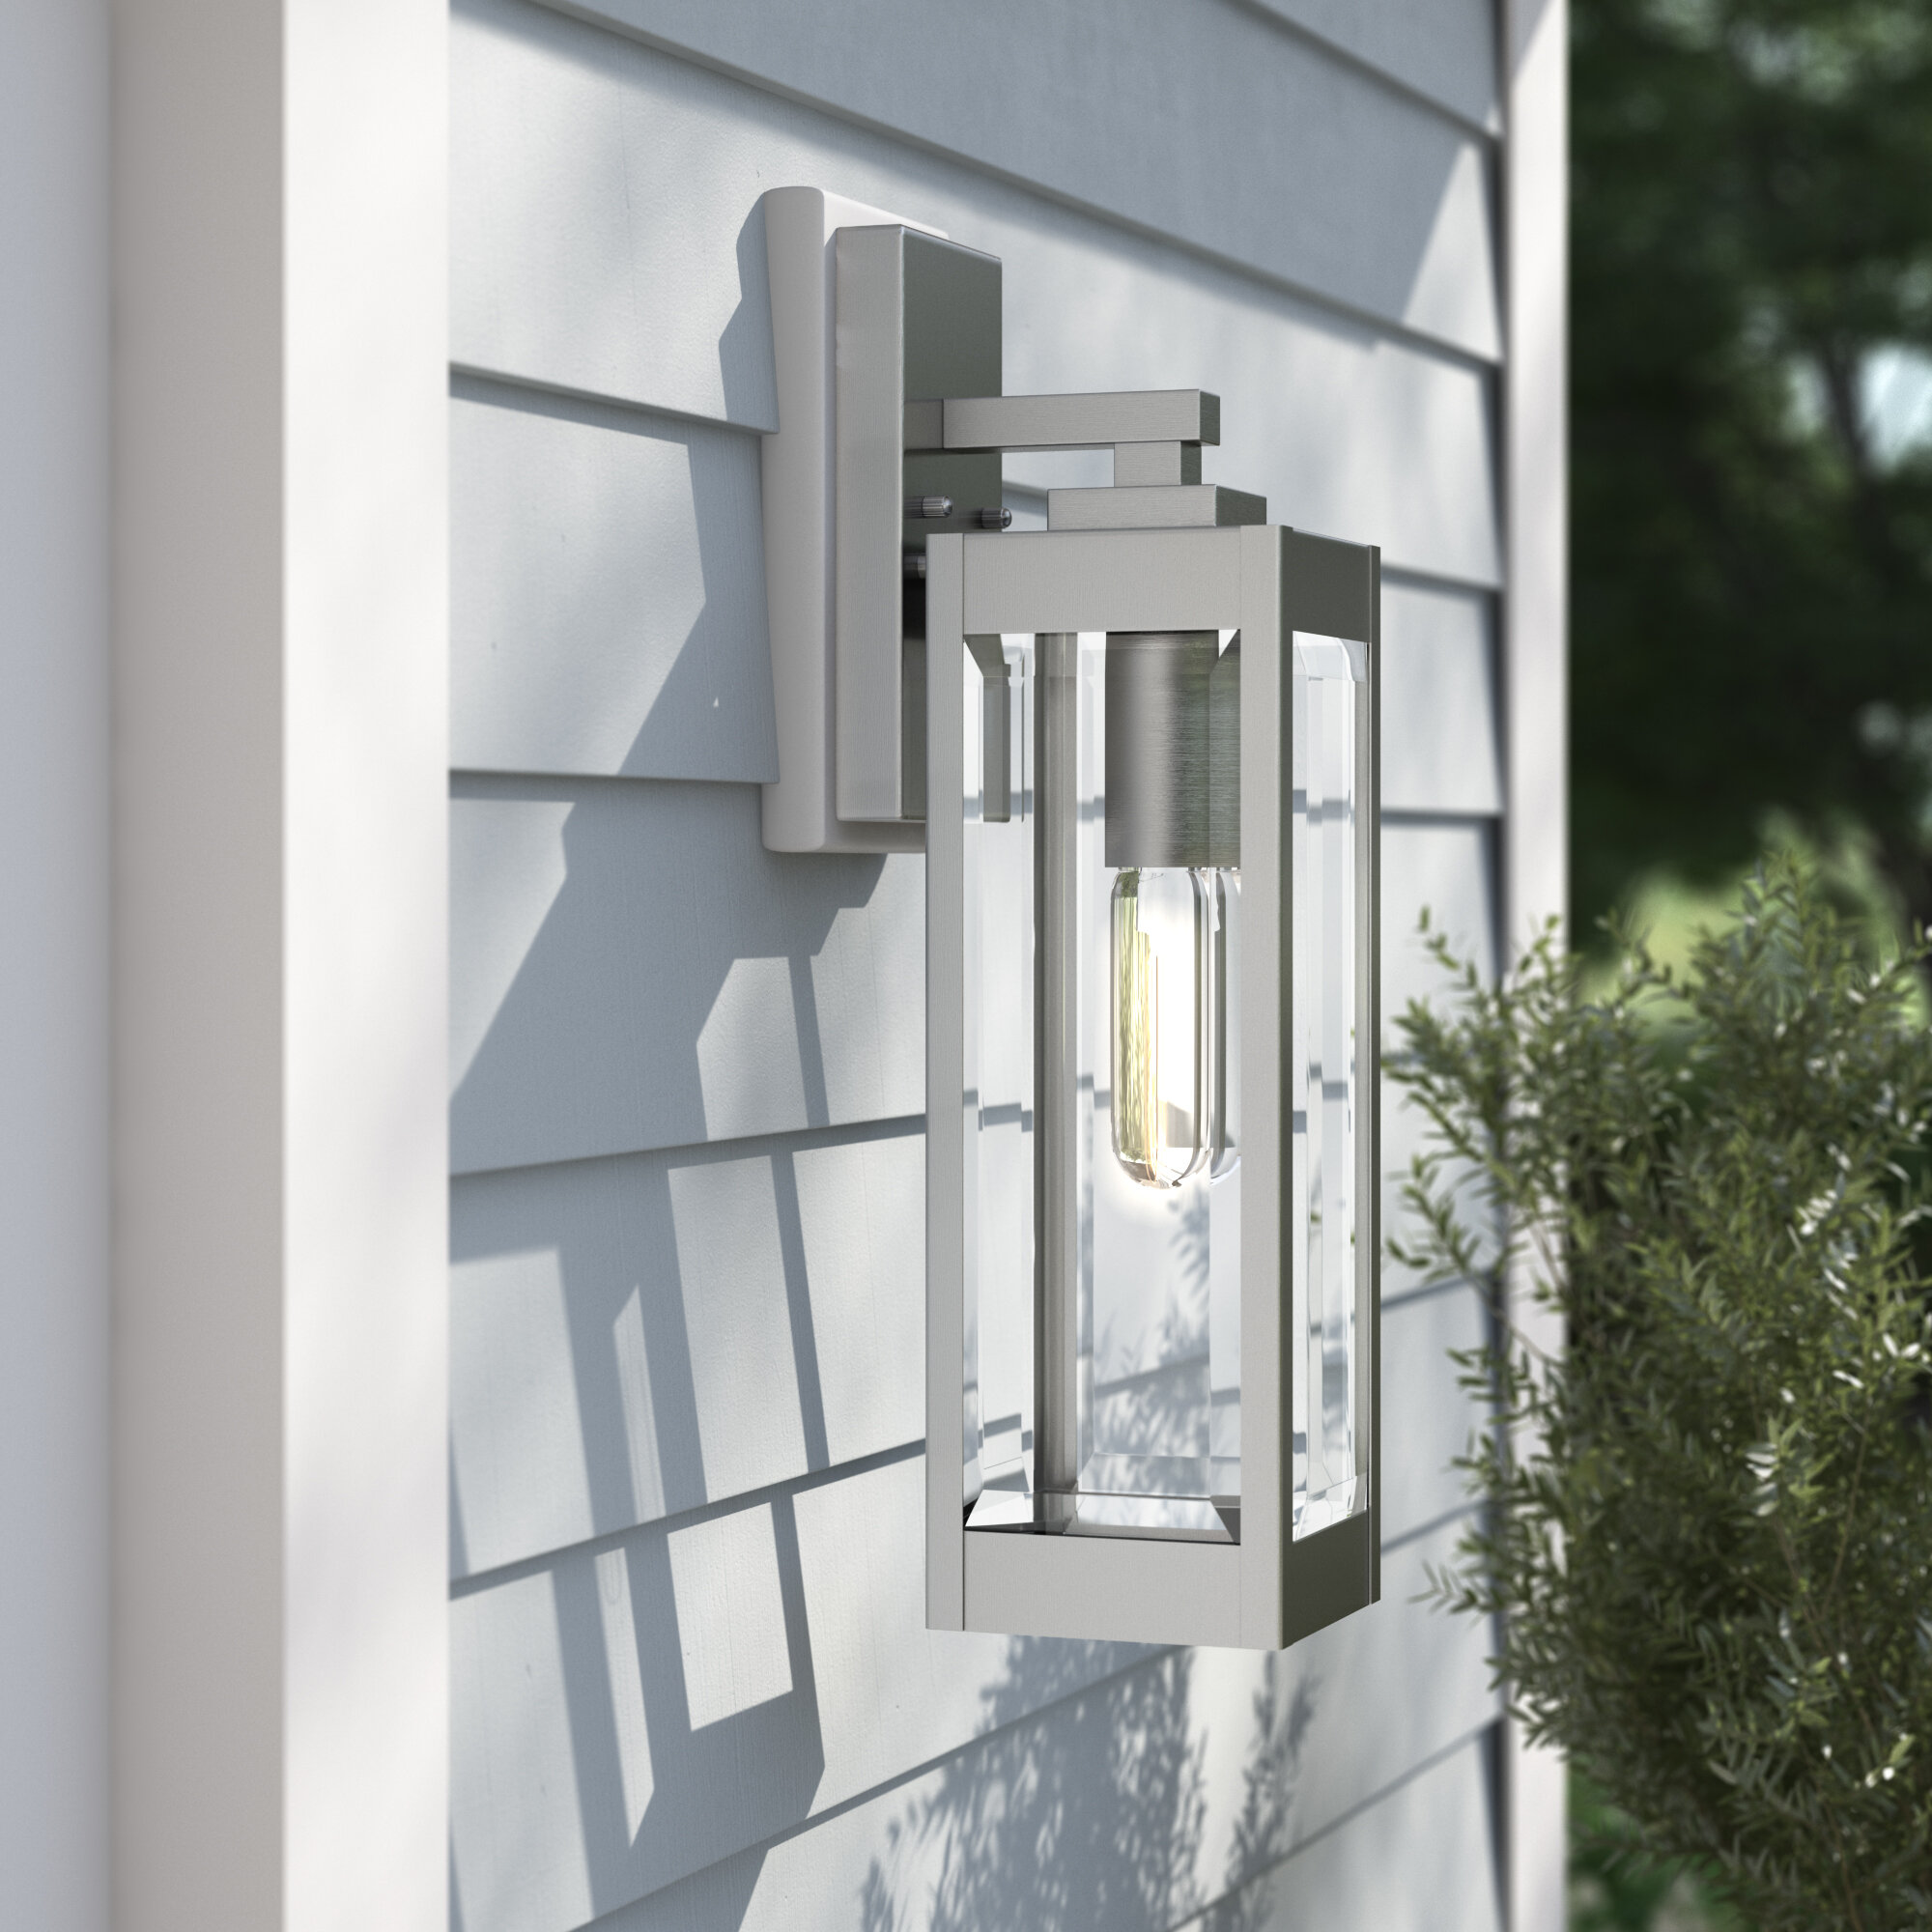 Details about   Modern LED Wall Light Water-proof Exterior Outdoor Porch Sconce Lamp Fixture 10W